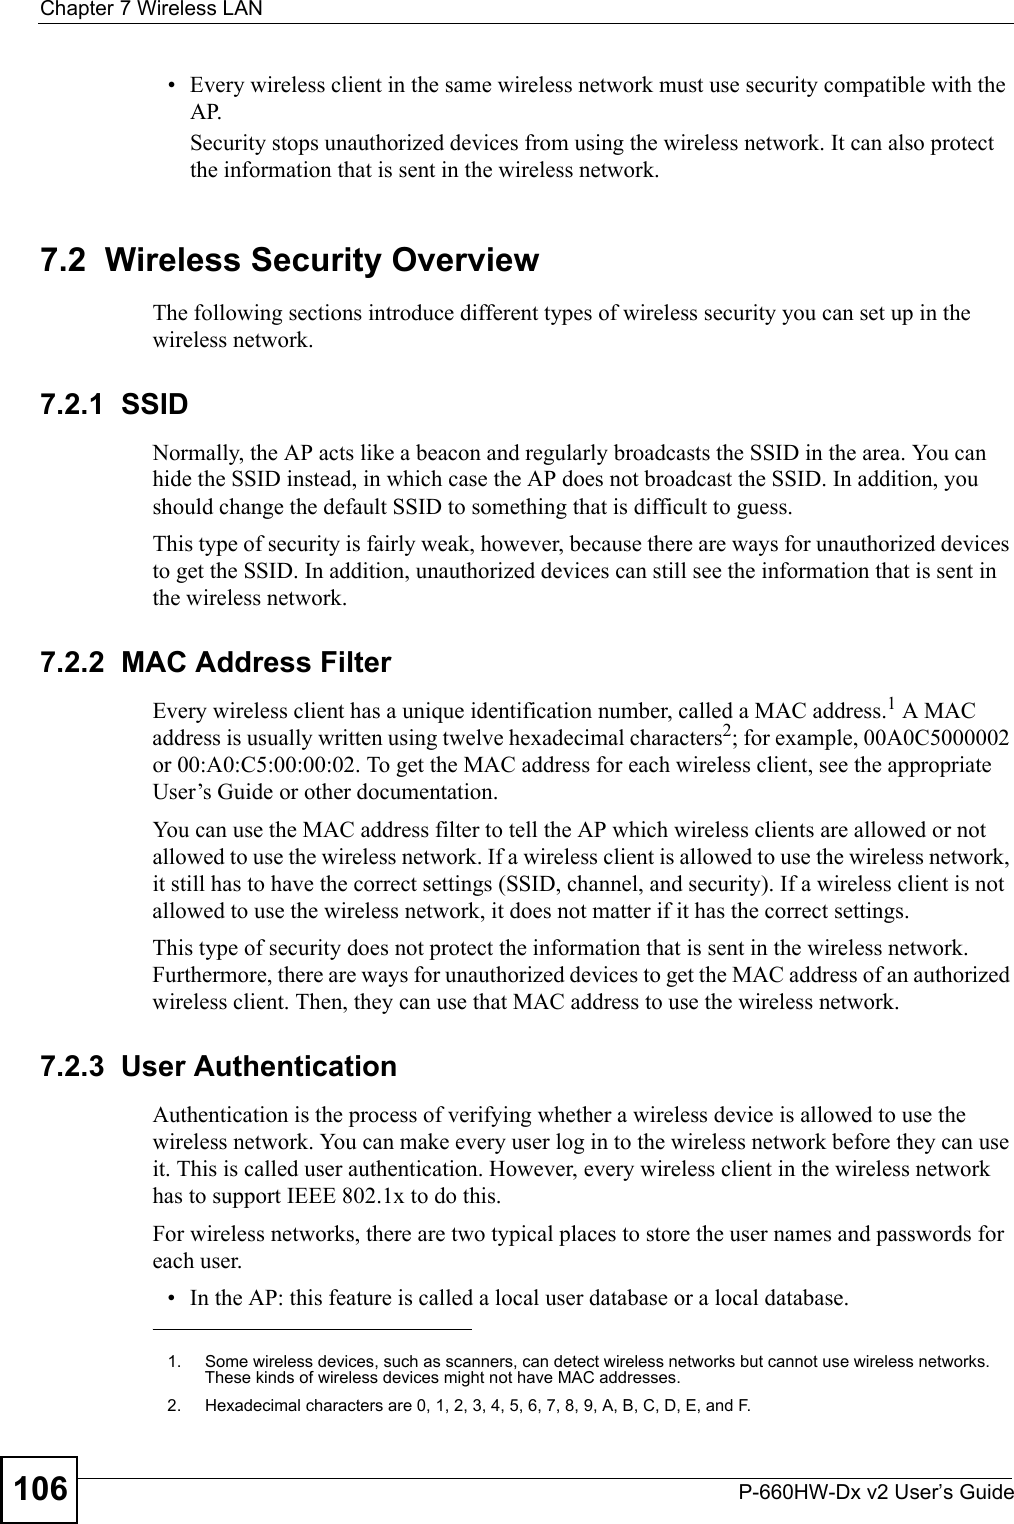 Chapter 7 Wireless LANP-660HW-Dx v2 User’s Guide106• Every wireless client in the same wireless network must use security compatible with the AP.Security stops unauthorized devices from using the wireless network. It can also protect the information that is sent in the wireless network.7.2  Wireless Security OverviewThe following sections introduce different types of wireless security you can set up in the wireless network.7.2.1  SSIDNormally, the AP acts like a beacon and regularly broadcasts the SSID in the area. You can hide the SSID instead, in which case the AP does not broadcast the SSID. In addition, you should change the default SSID to something that is difficult to guess.This type of security is fairly weak, however, because there are ways for unauthorized devices to get the SSID. In addition, unauthorized devices can still see the information that is sent in the wireless network.7.2.2  MAC Address FilterEvery wireless client has a unique identification number, called a MAC address.1 A MAC address is usually written using twelve hexadecimal characters2; for example, 00A0C5000002 or 00:A0:C5:00:00:02. To get the MAC address for each wireless client, see the appropriate User’s Guide or other documentation.You can use the MAC address filter to tell the AP which wireless clients are allowed or not allowed to use the wireless network. If a wireless client is allowed to use the wireless network, it still has to have the correct settings (SSID, channel, and security). If a wireless client is not allowed to use the wireless network, it does not matter if it has the correct settings.This type of security does not protect the information that is sent in the wireless network. Furthermore, there are ways for unauthorized devices to get the MAC address of an authorized wireless client. Then, they can use that MAC address to use the wireless network.7.2.3  User AuthenticationAuthentication is the process of verifying whether a wireless device is allowed to use the wireless network. You can make every user log in to the wireless network before they can use it. This is called user authentication. However, every wireless client in the wireless network has to support IEEE 802.1x to do this.For wireless networks, there are two typical places to store the user names and passwords for each user.• In the AP: this feature is called a local user database or a local database.1. Some wireless devices, such as scanners, can detect wireless networks but cannot use wireless networks. These kinds of wireless devices might not have MAC addresses.2. Hexadecimal characters are 0, 1, 2, 3, 4, 5, 6, 7, 8, 9, A, B, C, D, E, and F.